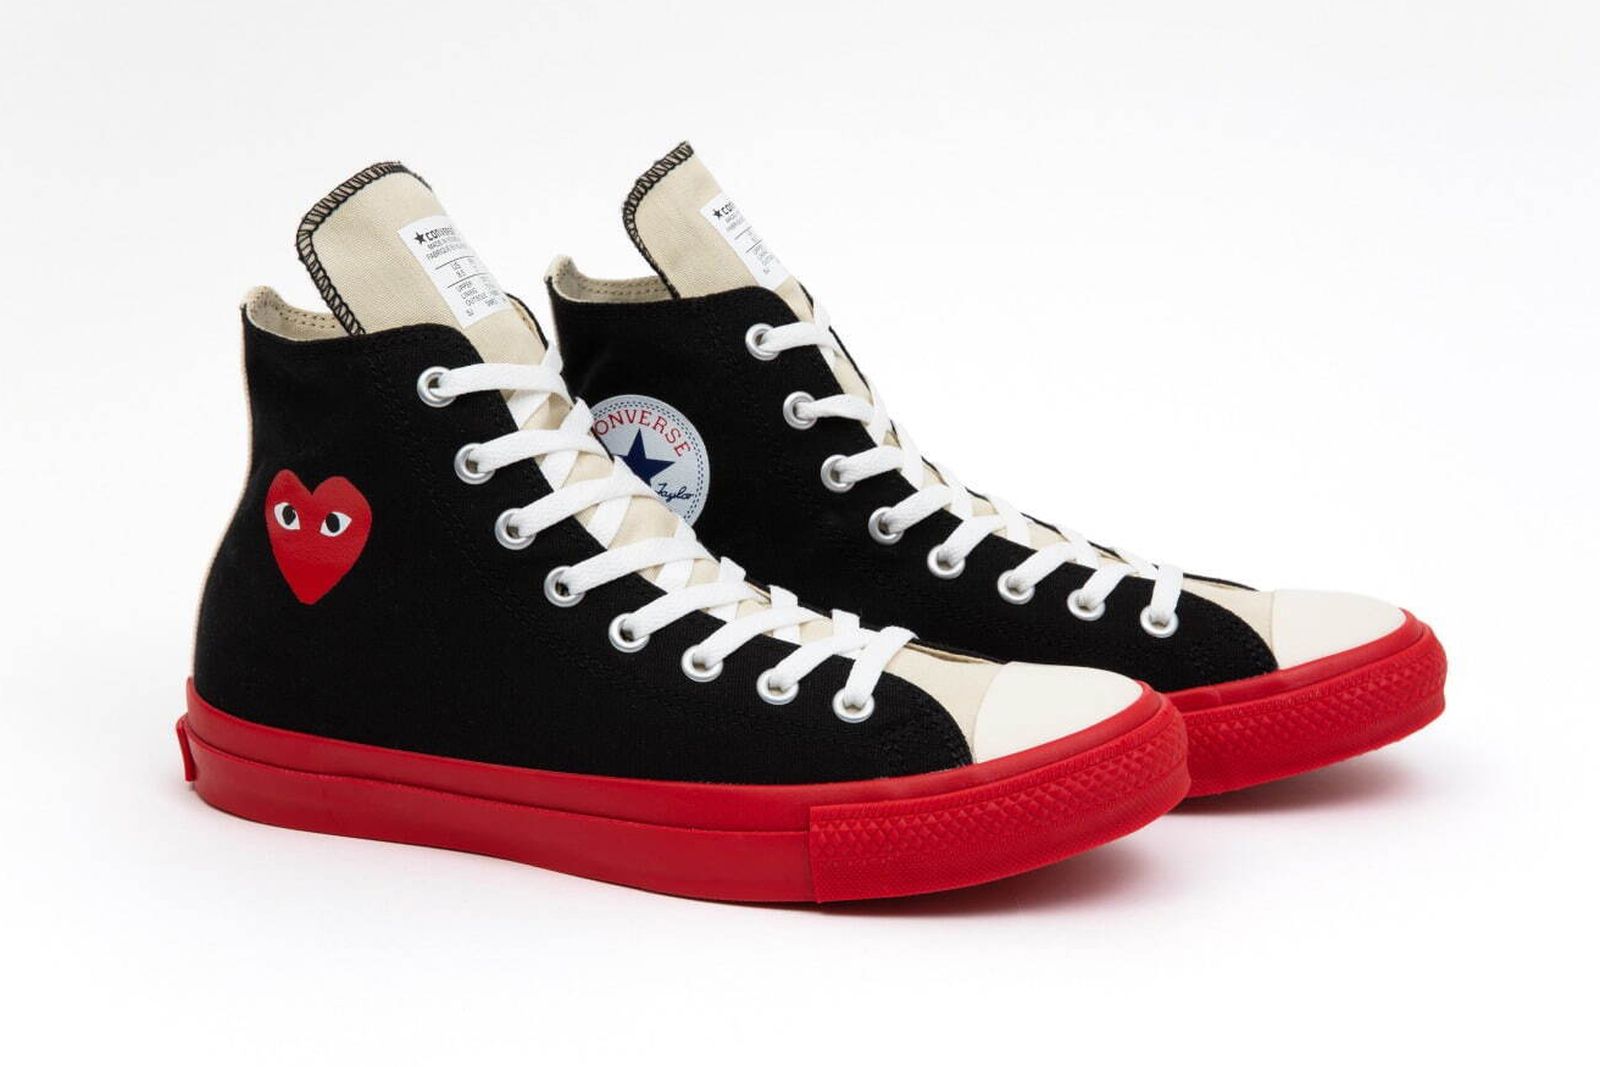 CdG & Converse Drop Collab Sneakers: Date